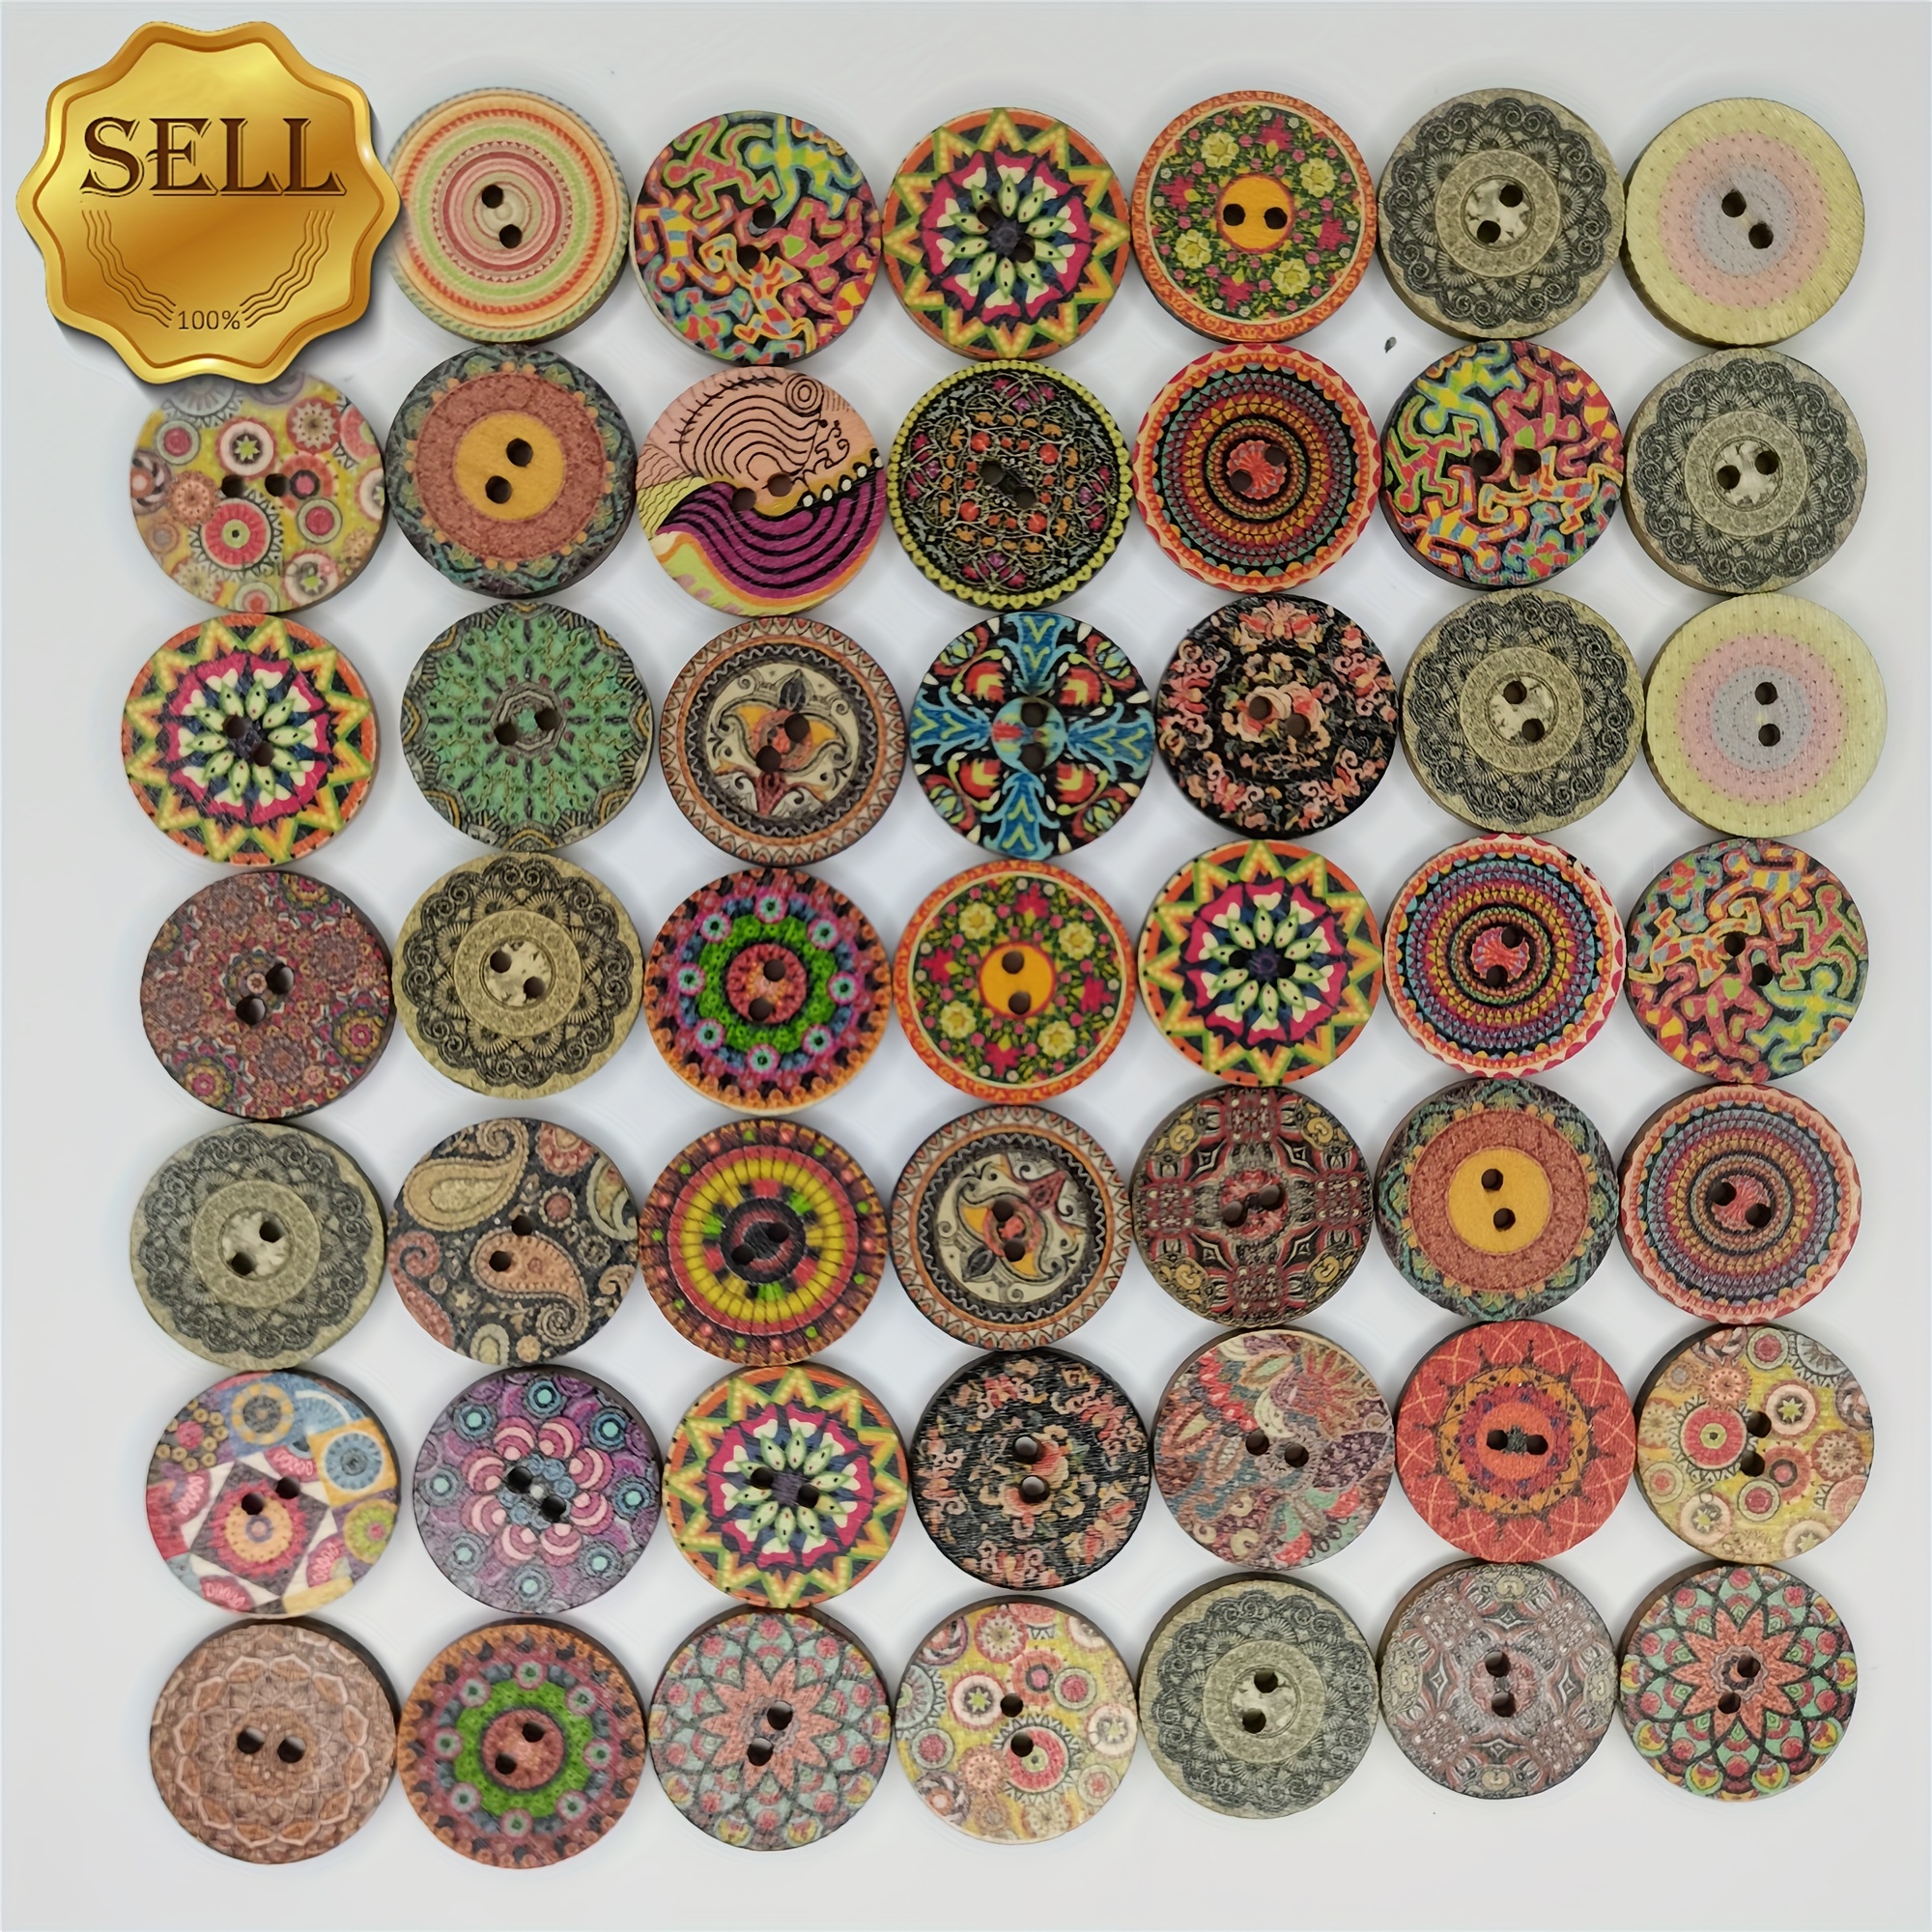 50 Pcs 20mm Wooden Buttons, 3/4 Wood Buttons Craft Sewing Button for  Crafts Sewing DIY